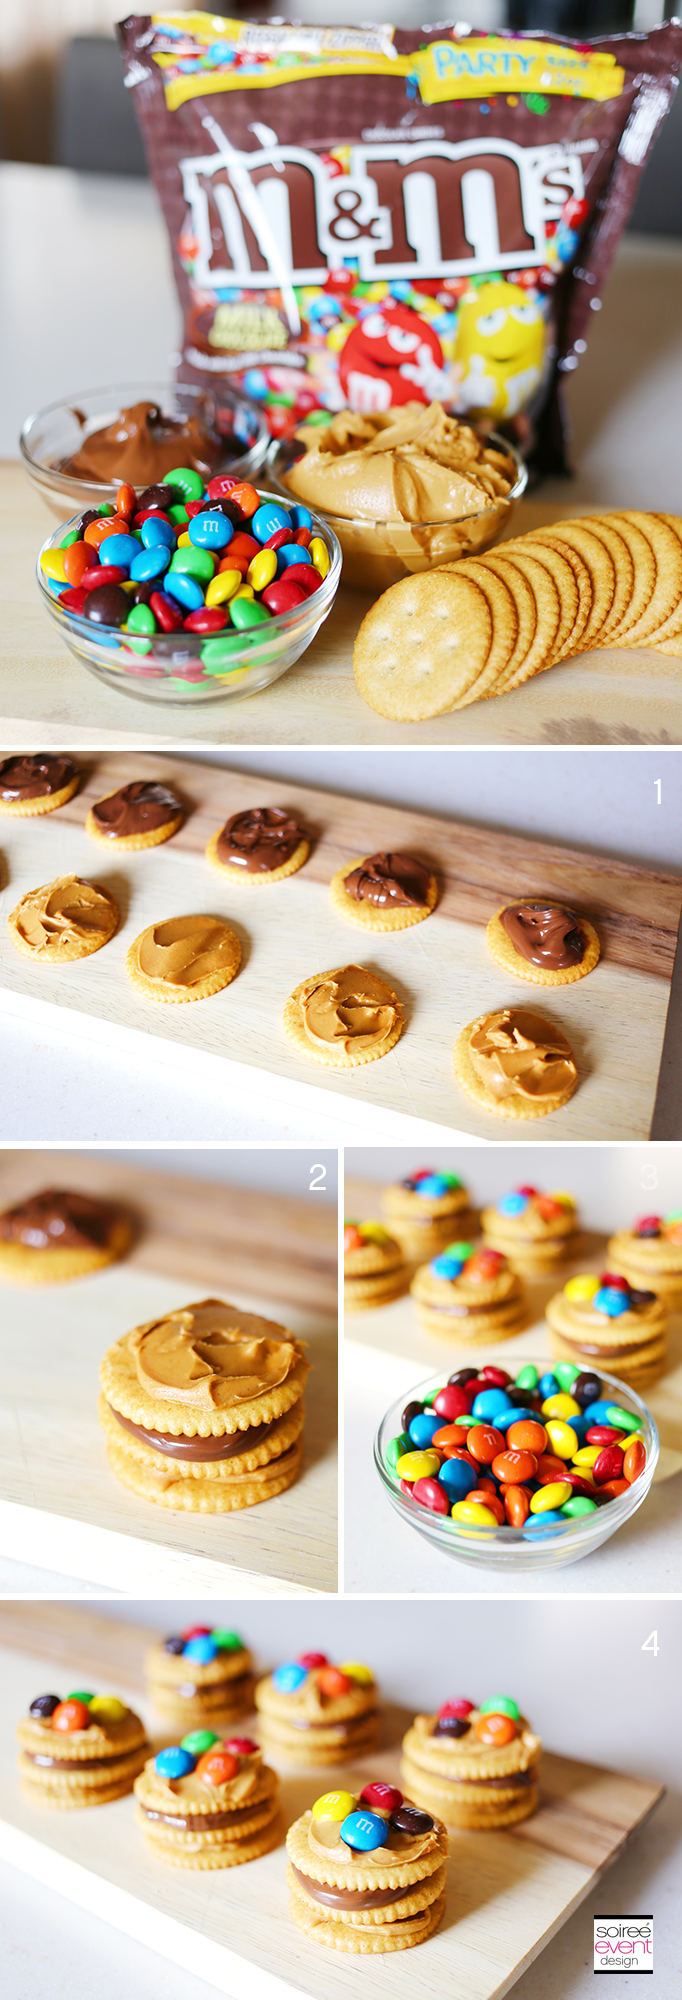 Chocolate Peanut Butter M&Ms Cracker Stackers Recipe